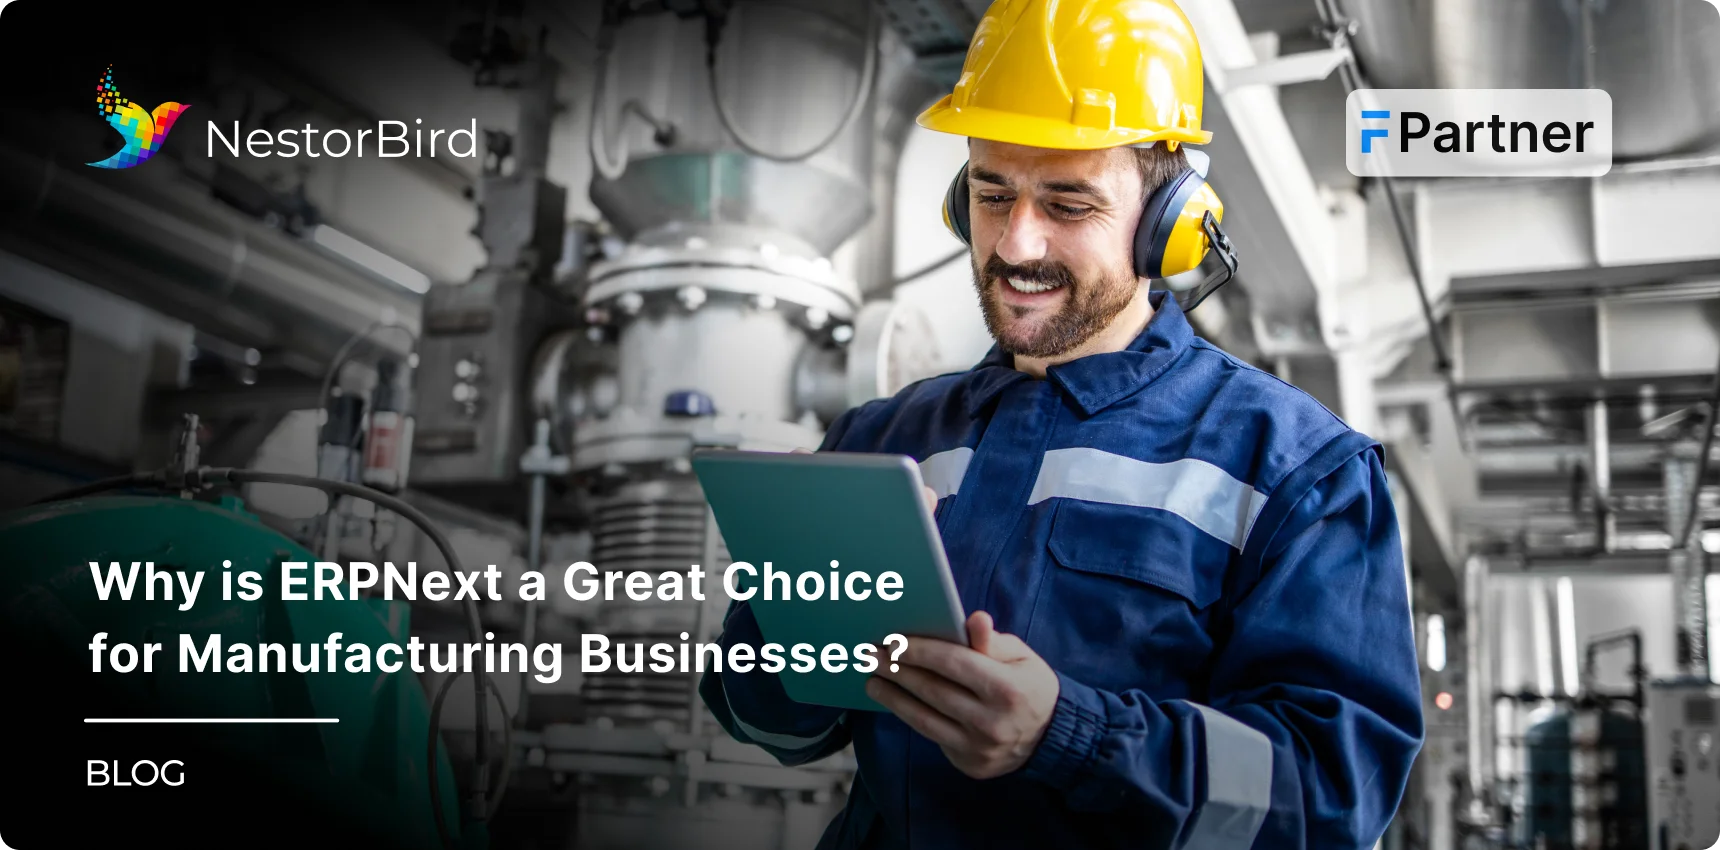 Why is ERPNext a Great Choice for Manufacturing Businesses?